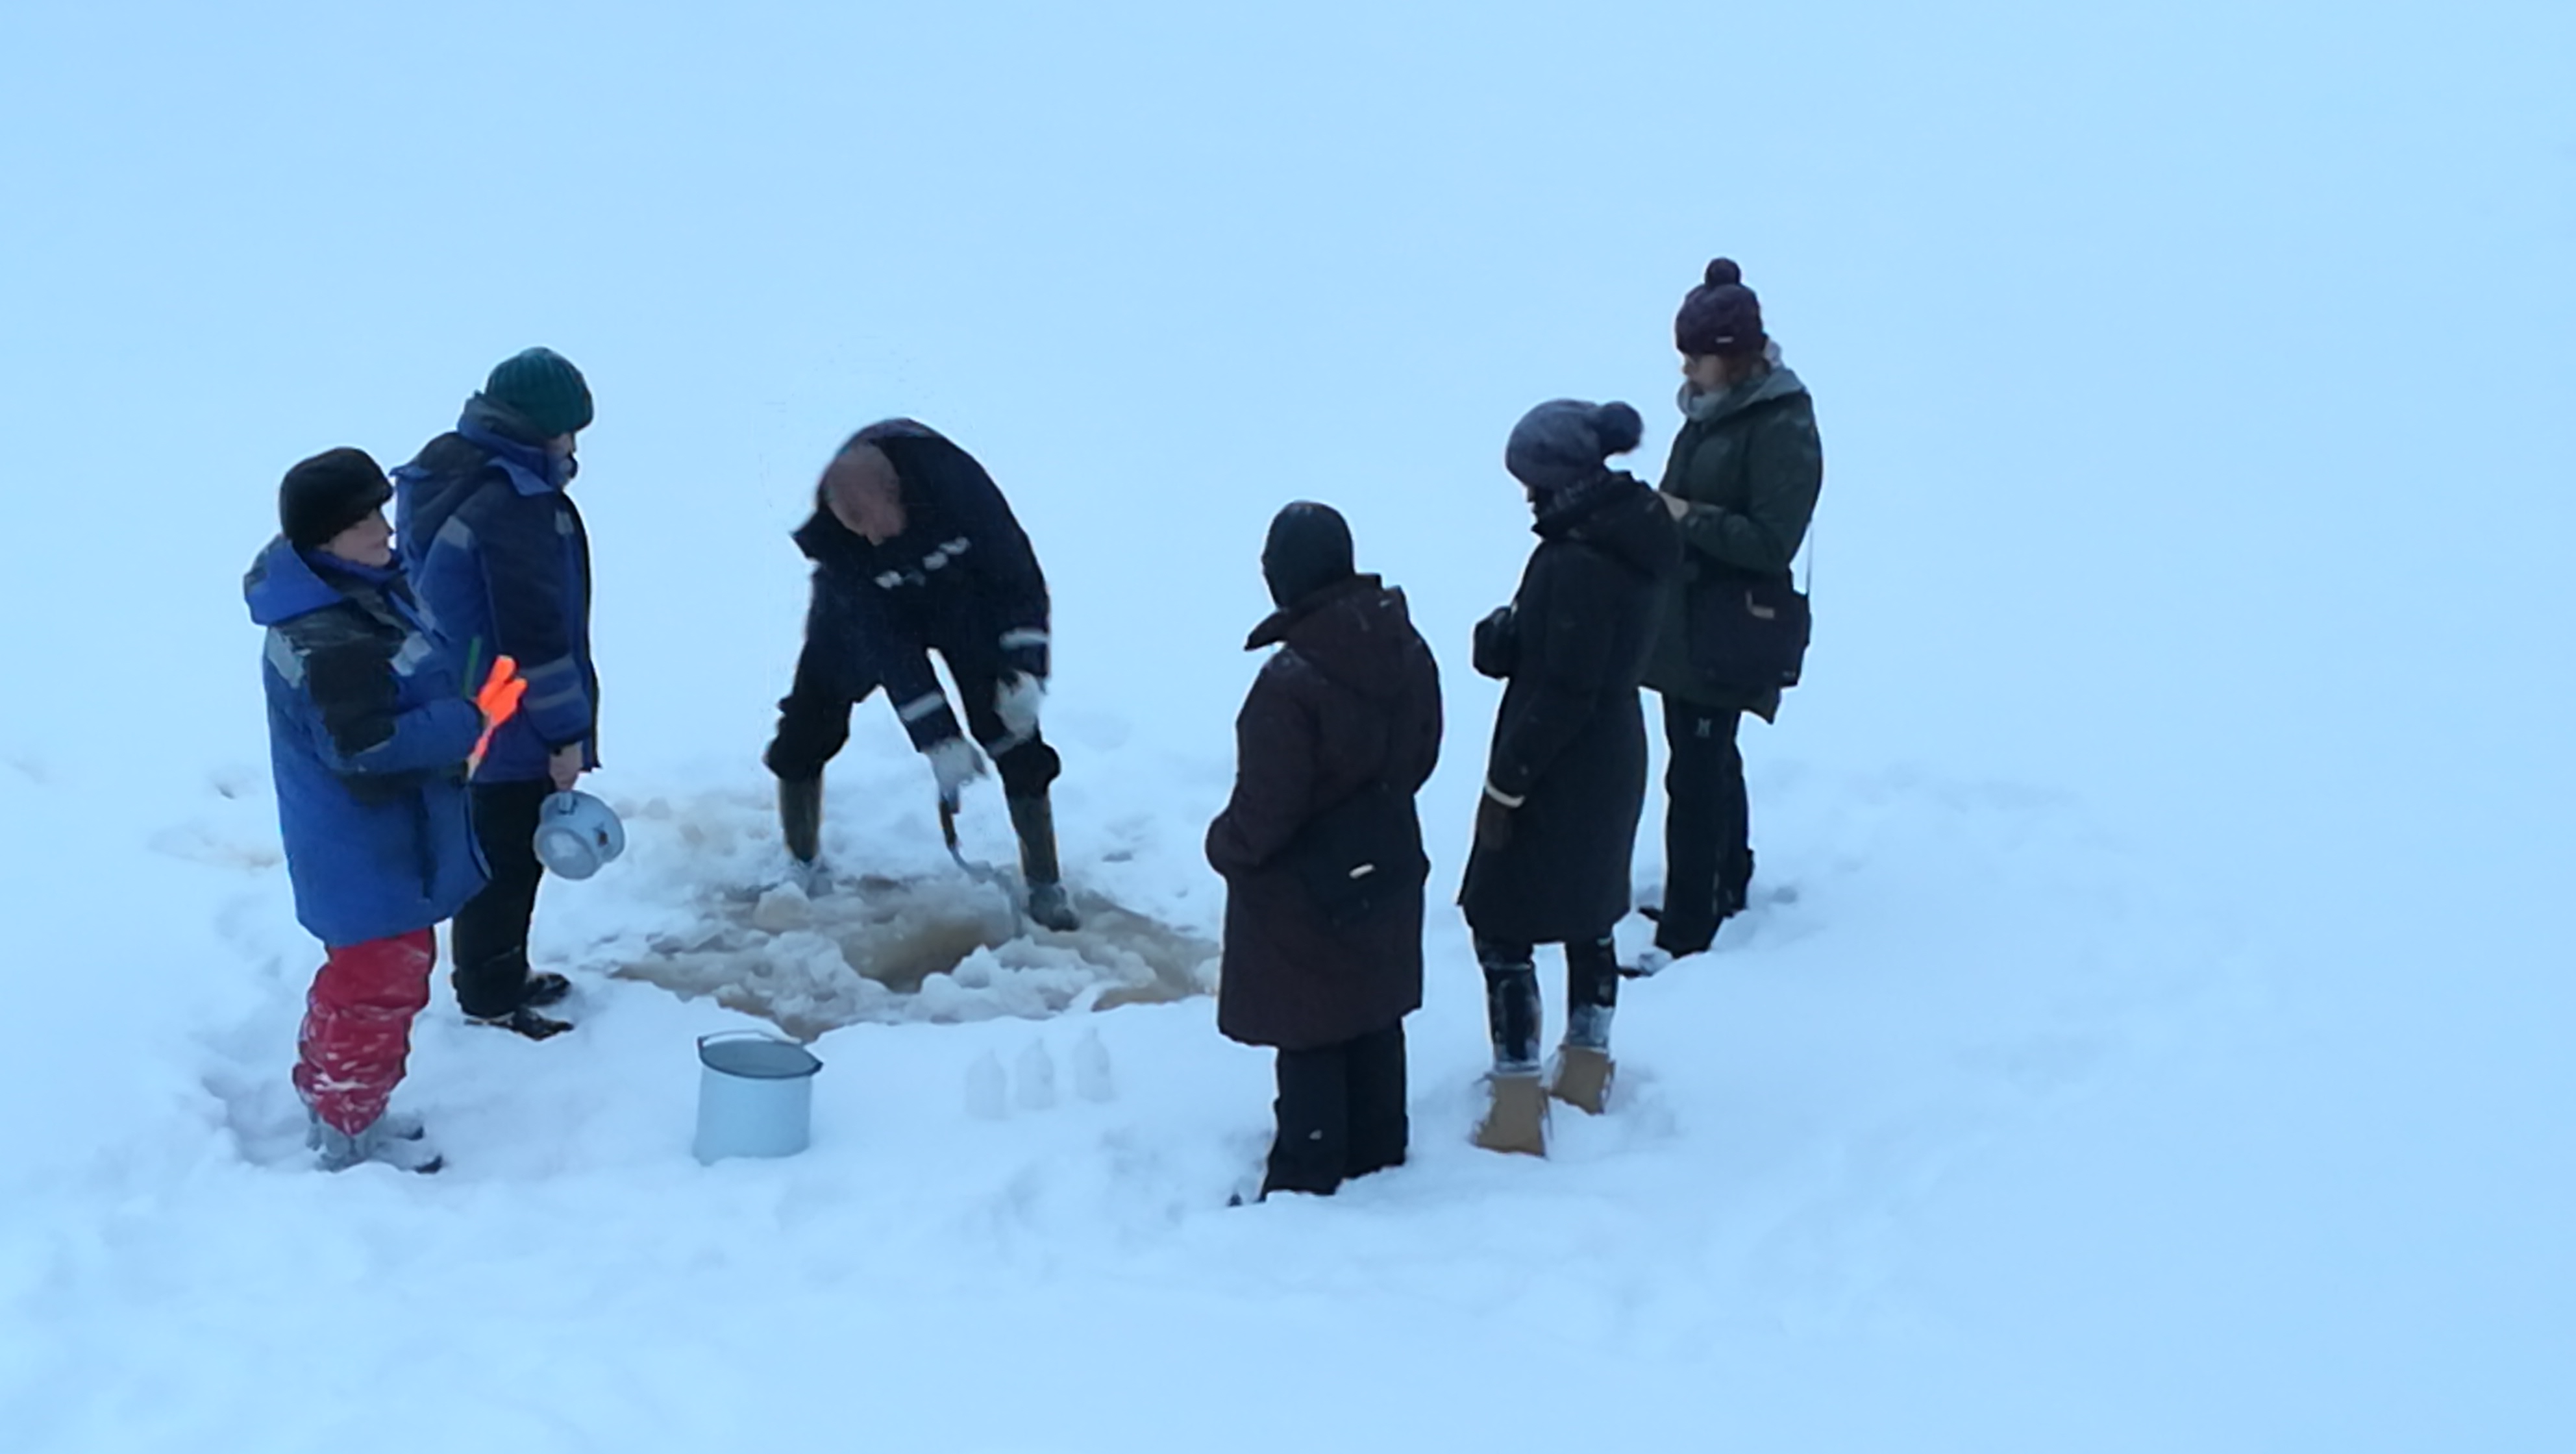 On January 22-23, 2019 project partners of КА5016 jointly took samples of Tohmajoki river water